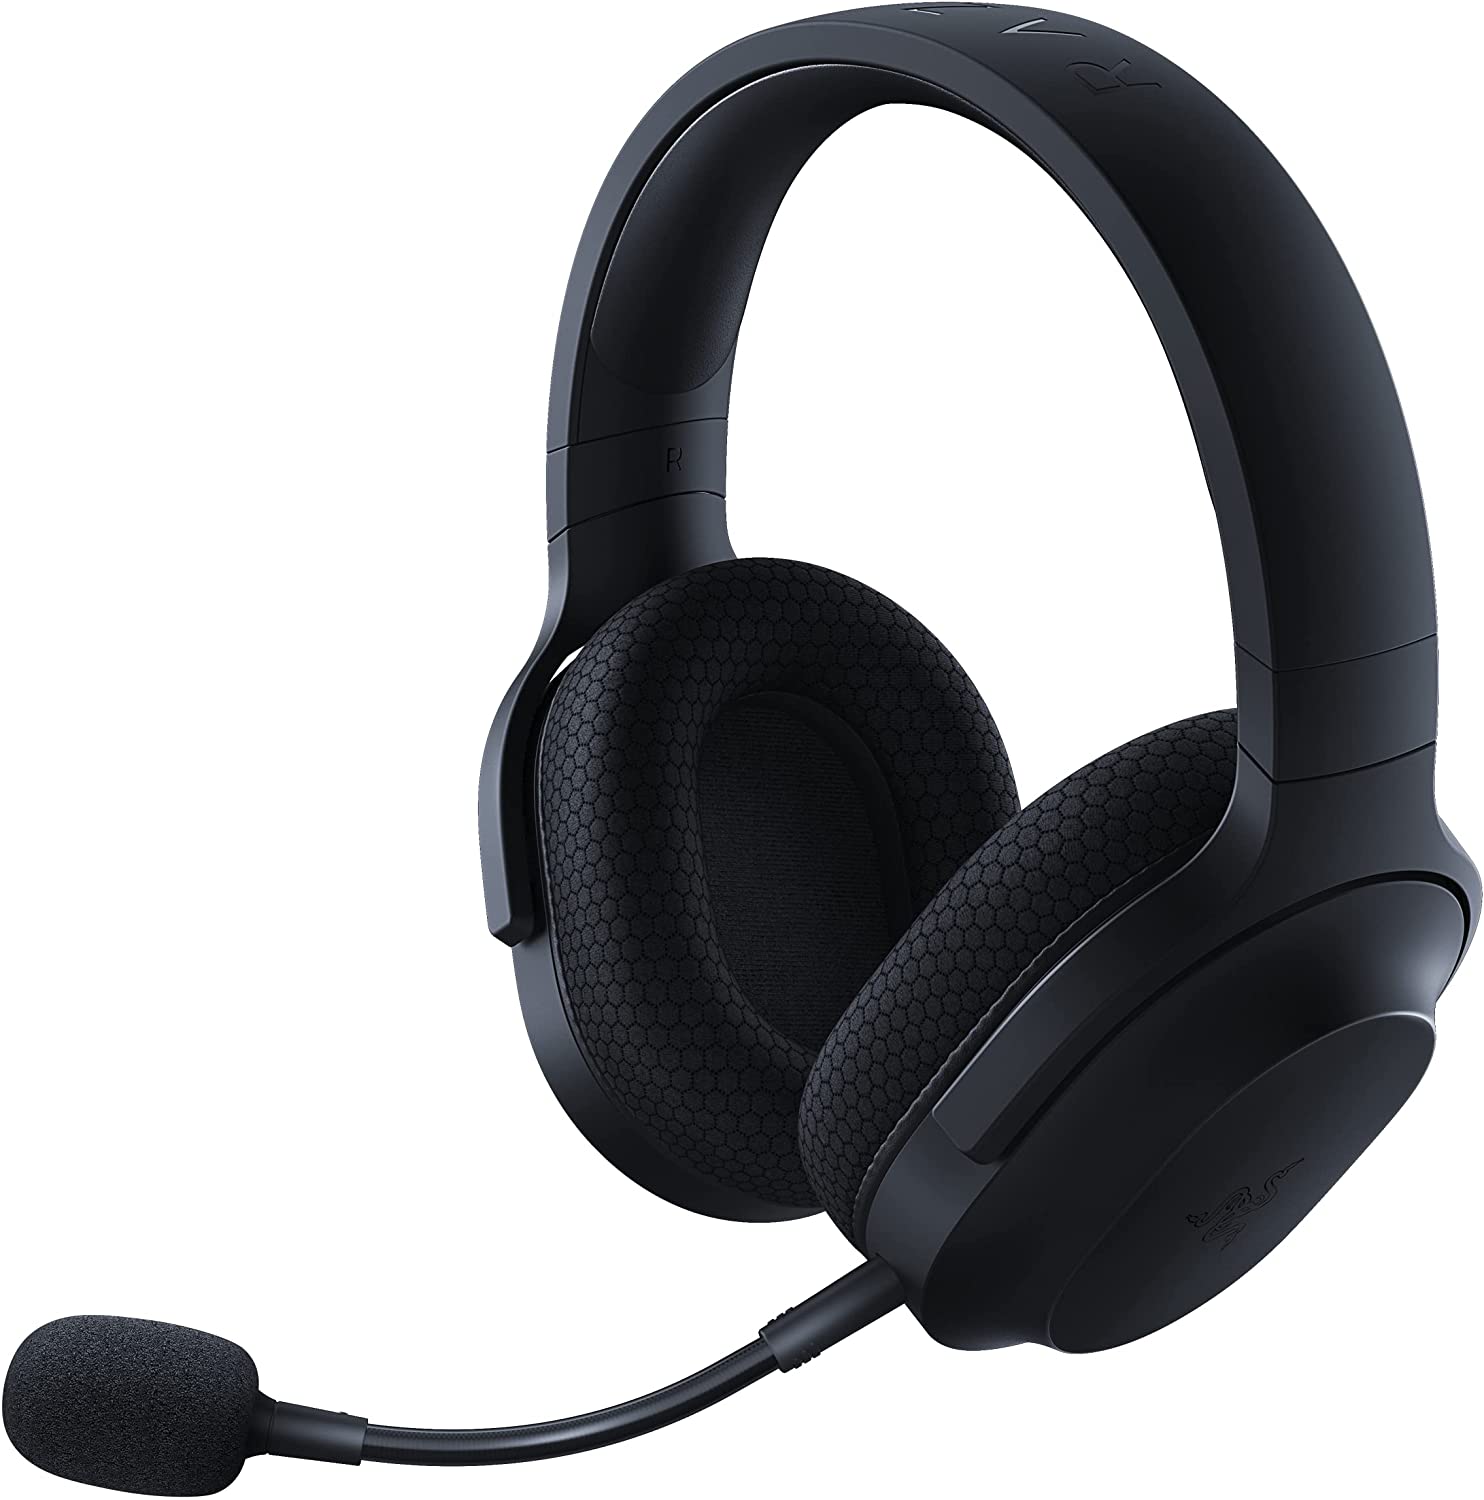 Image for Get a Razer Barracuda X headset for nearly half price this Cyber Monday